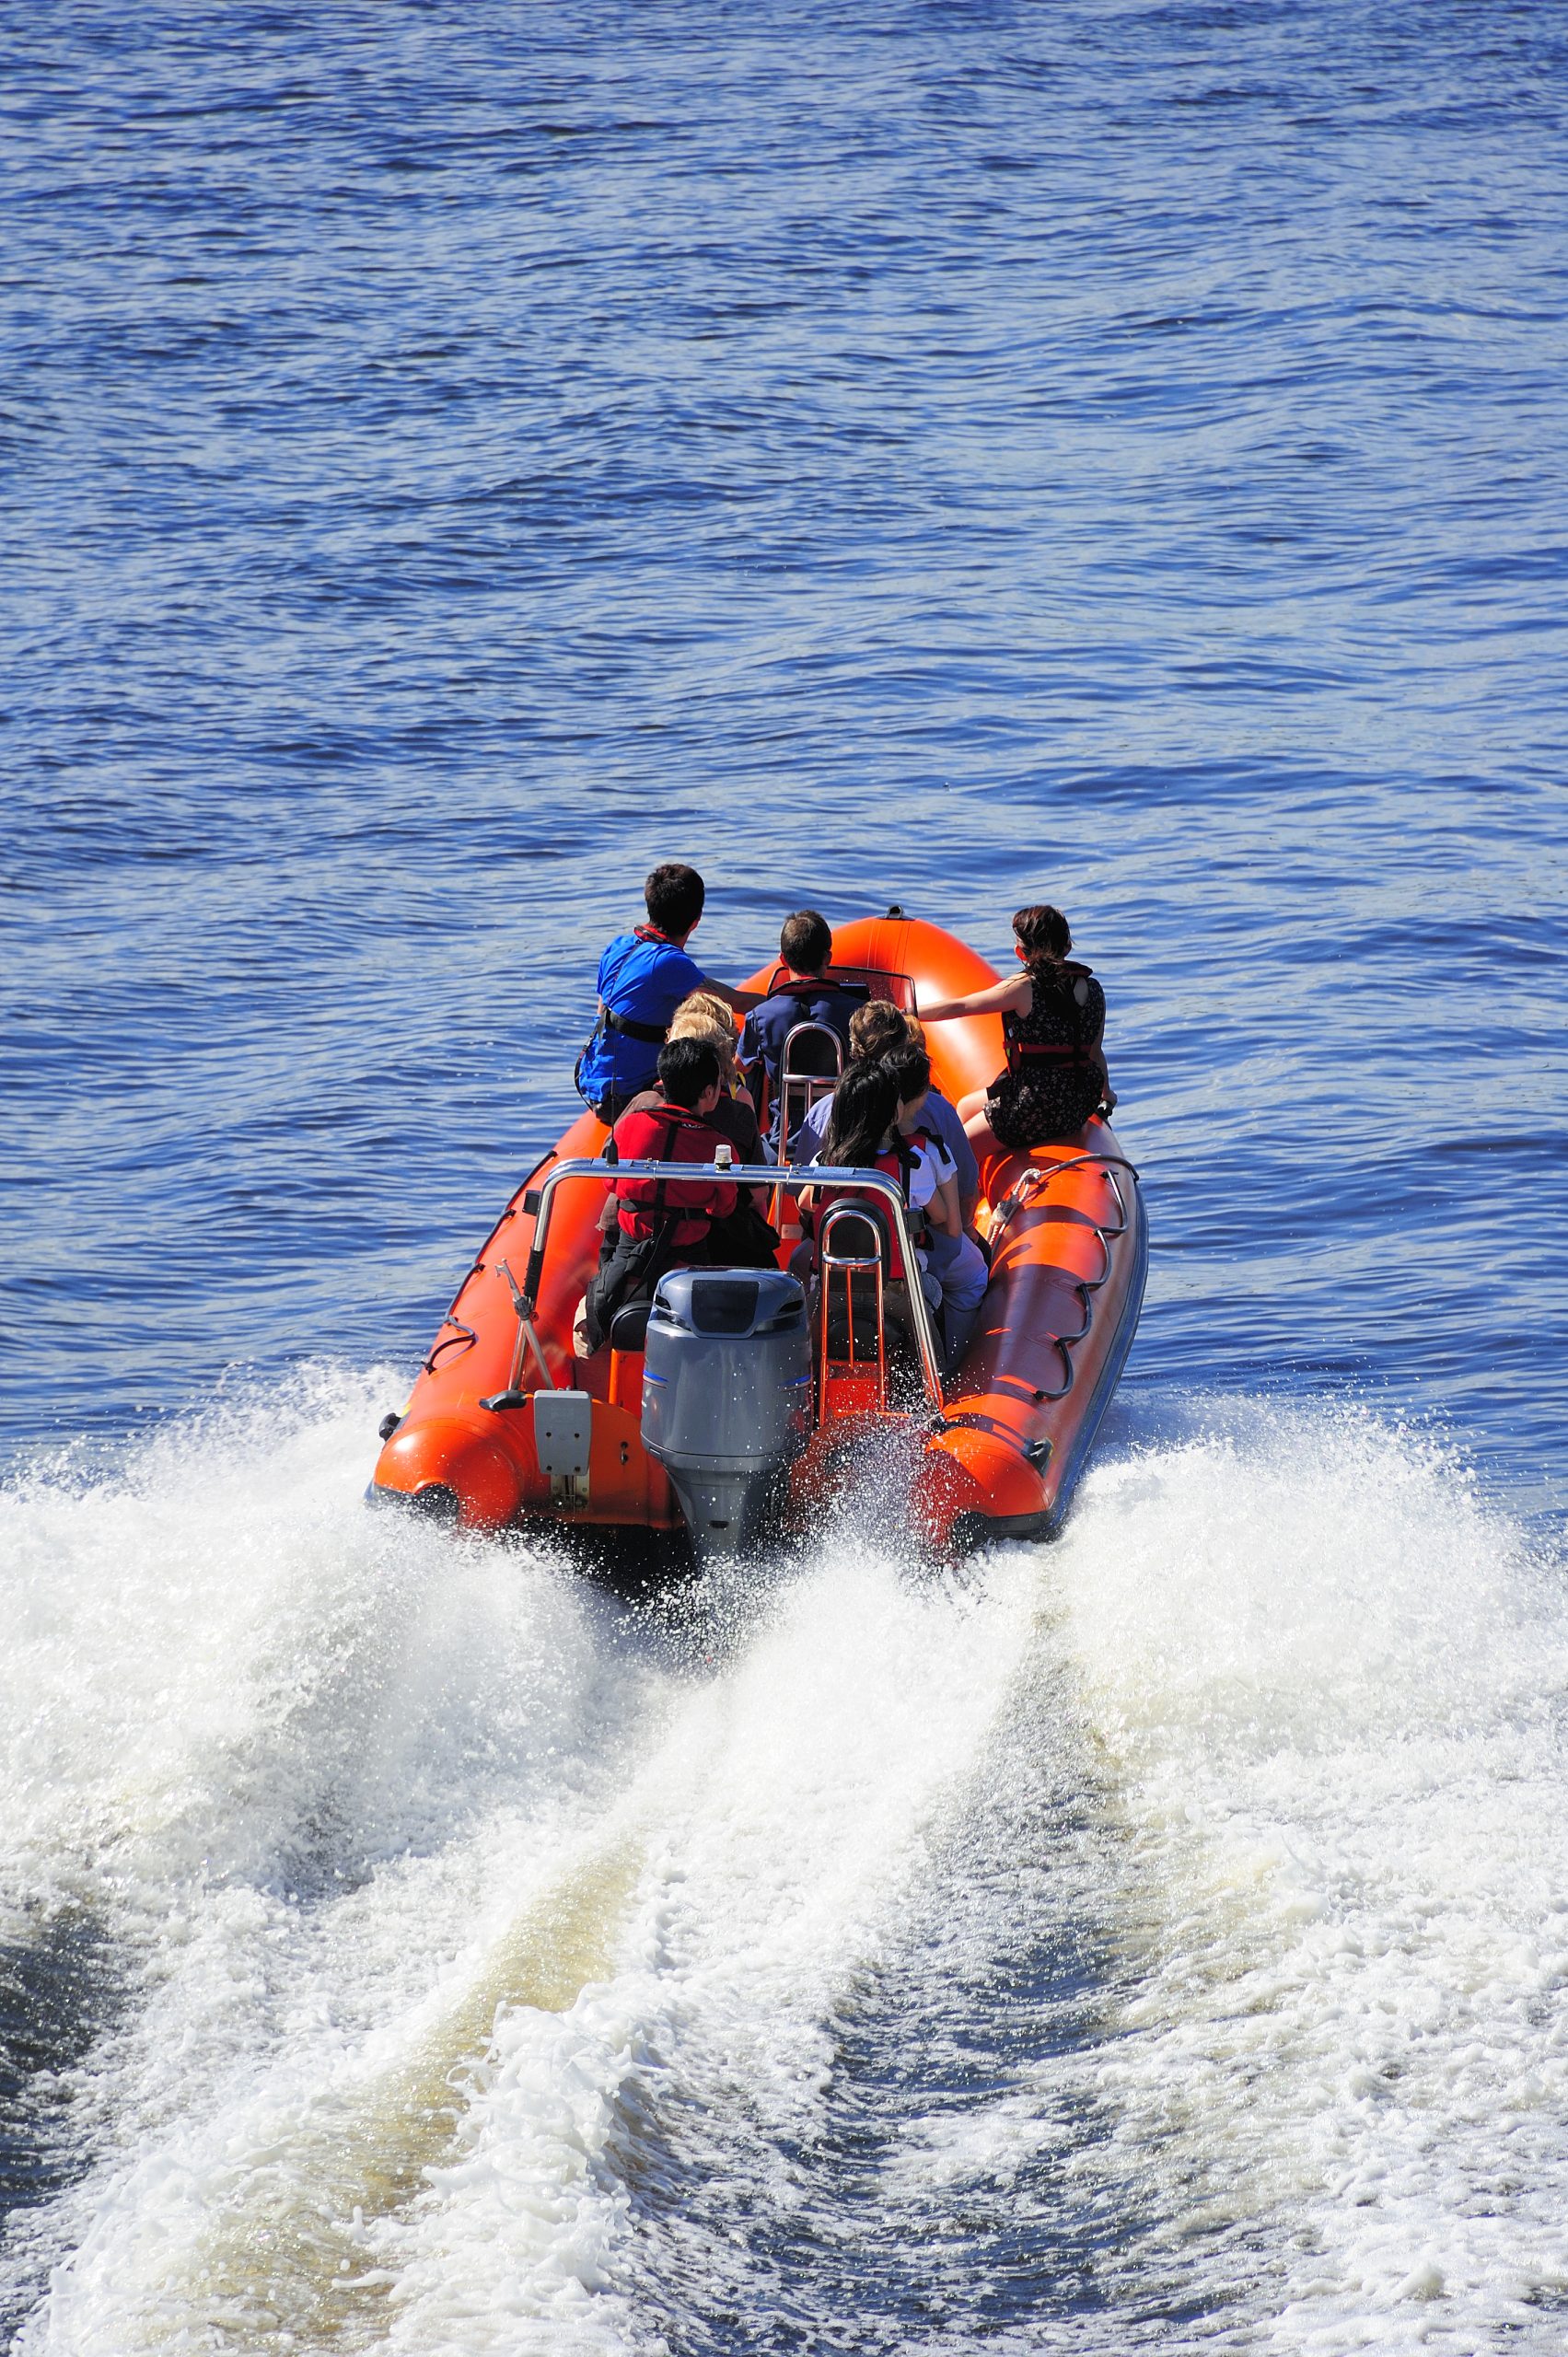 Dangerous Powerboat Overloaded with Passengers, Boating Accident